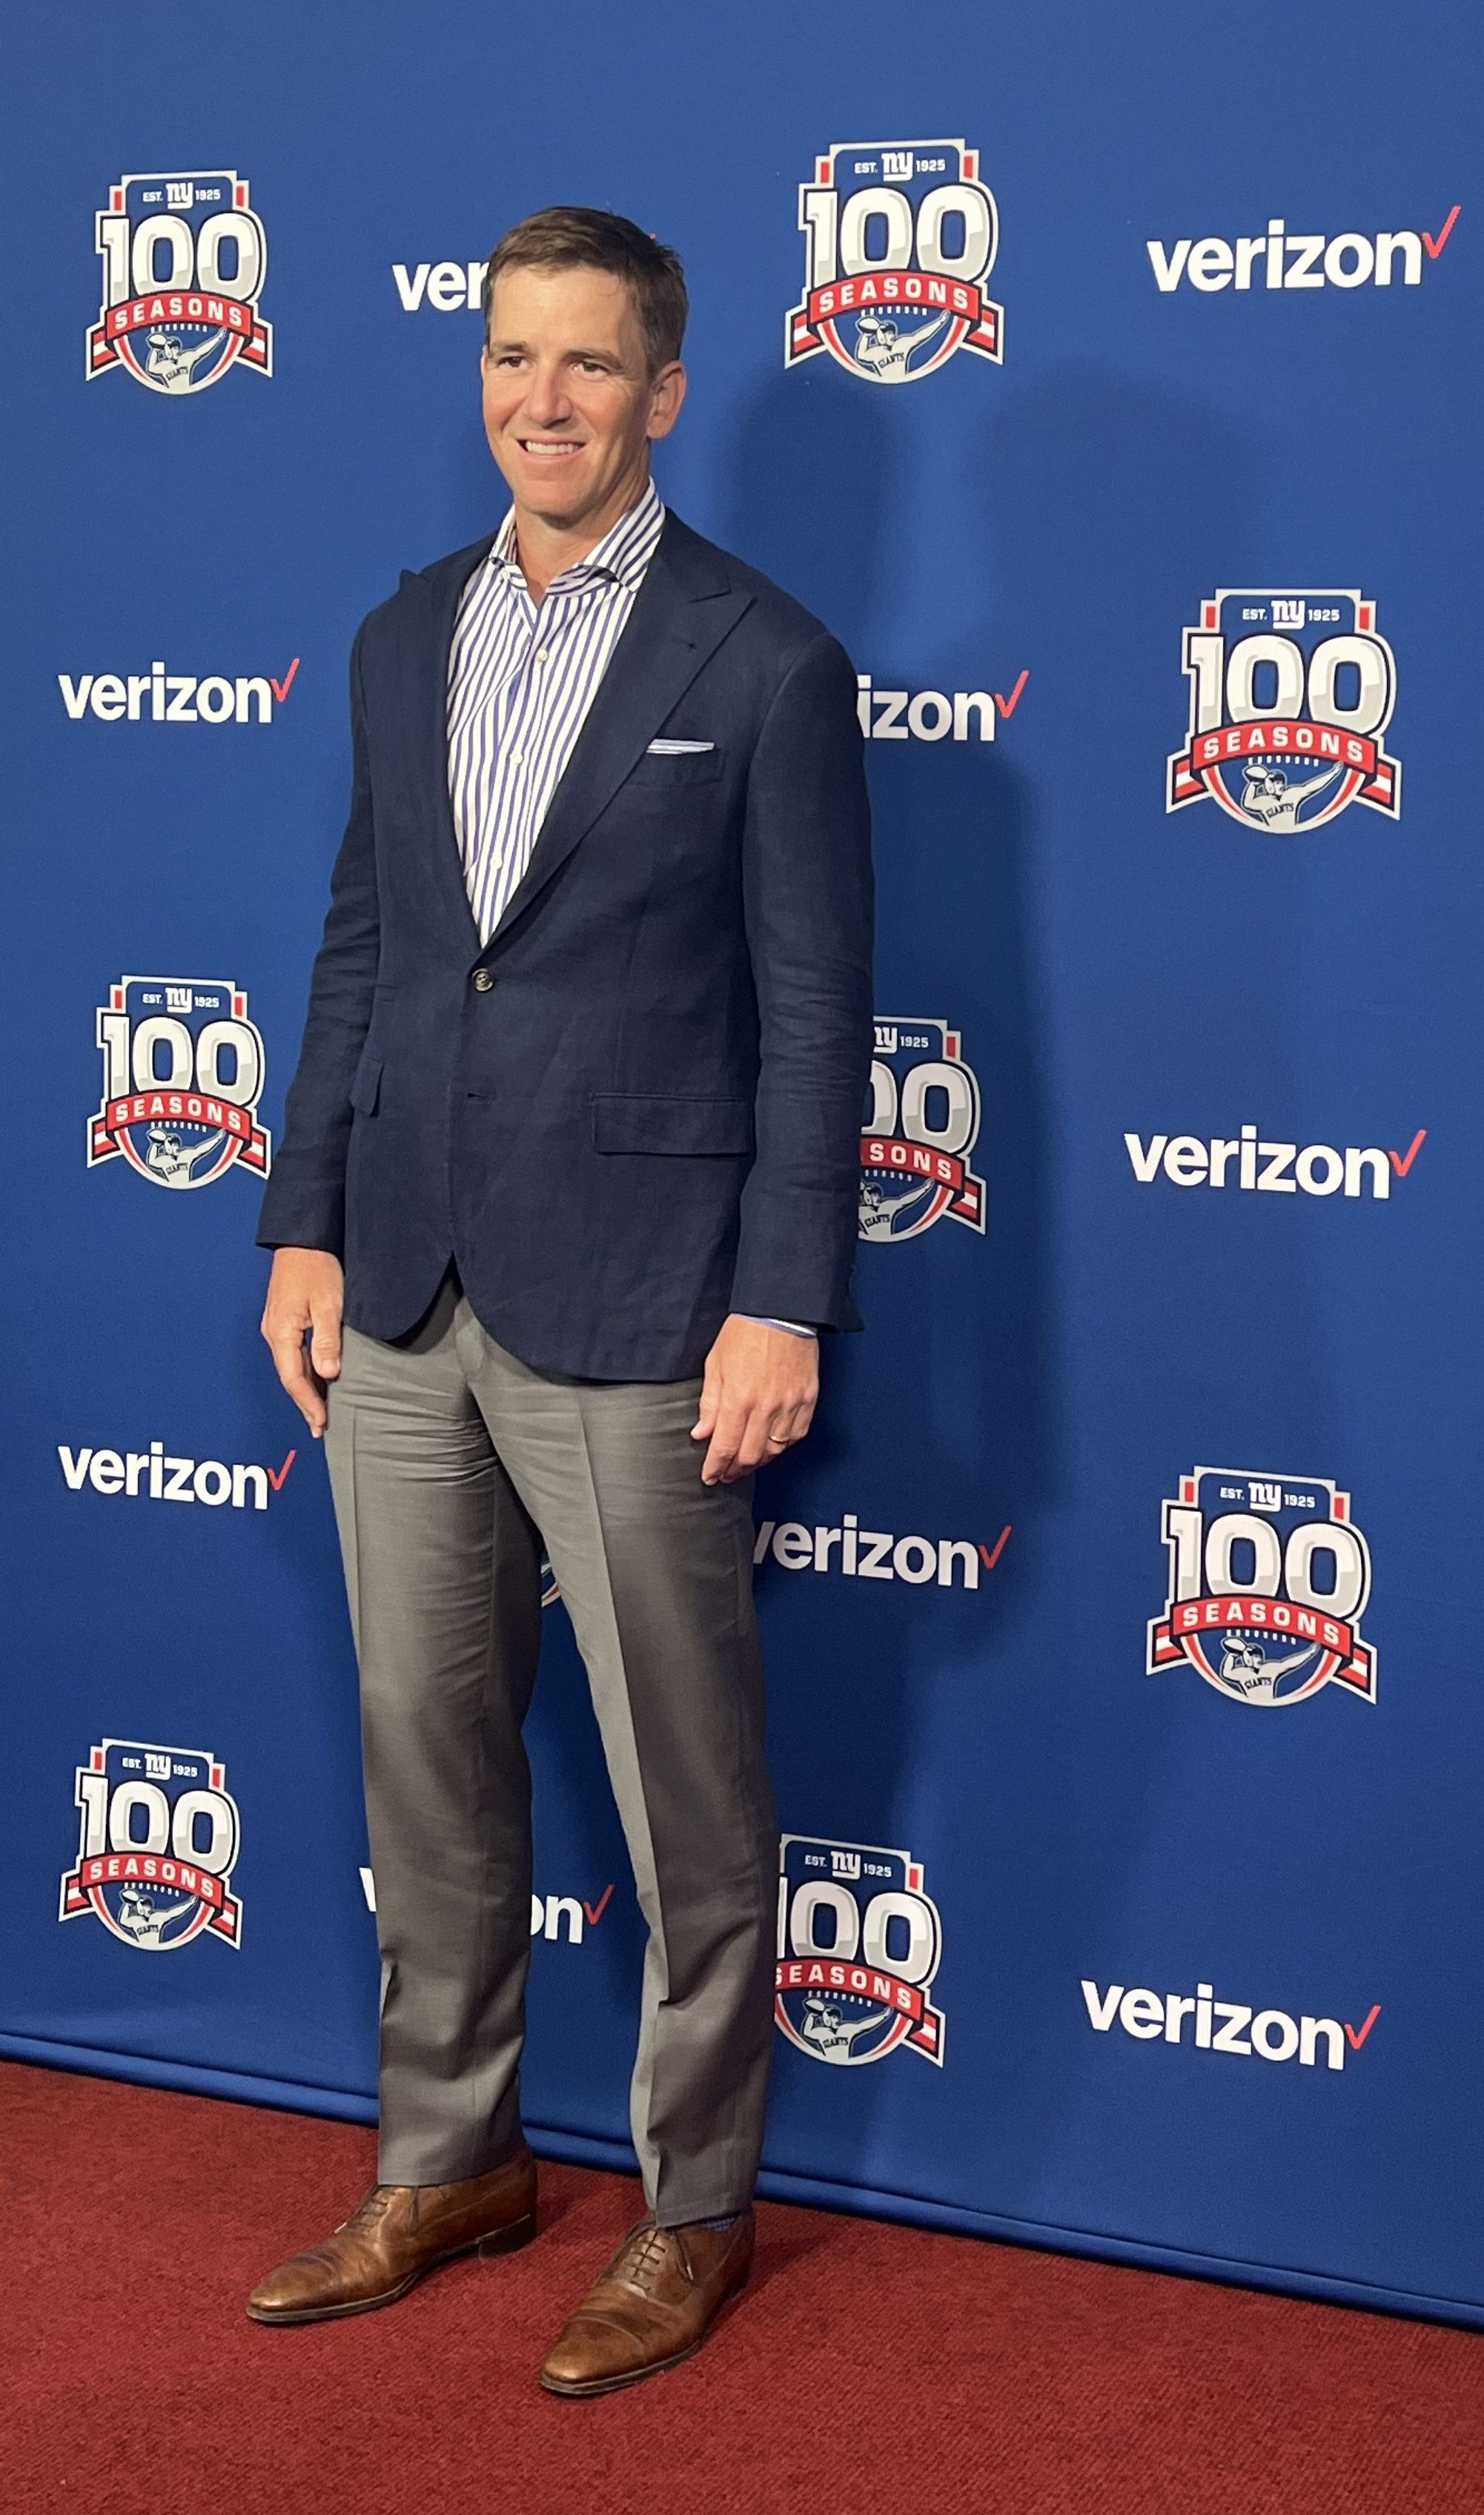 Eli Manning at the Giants' "A Night with Legends" event celebrating the team's 100th season.